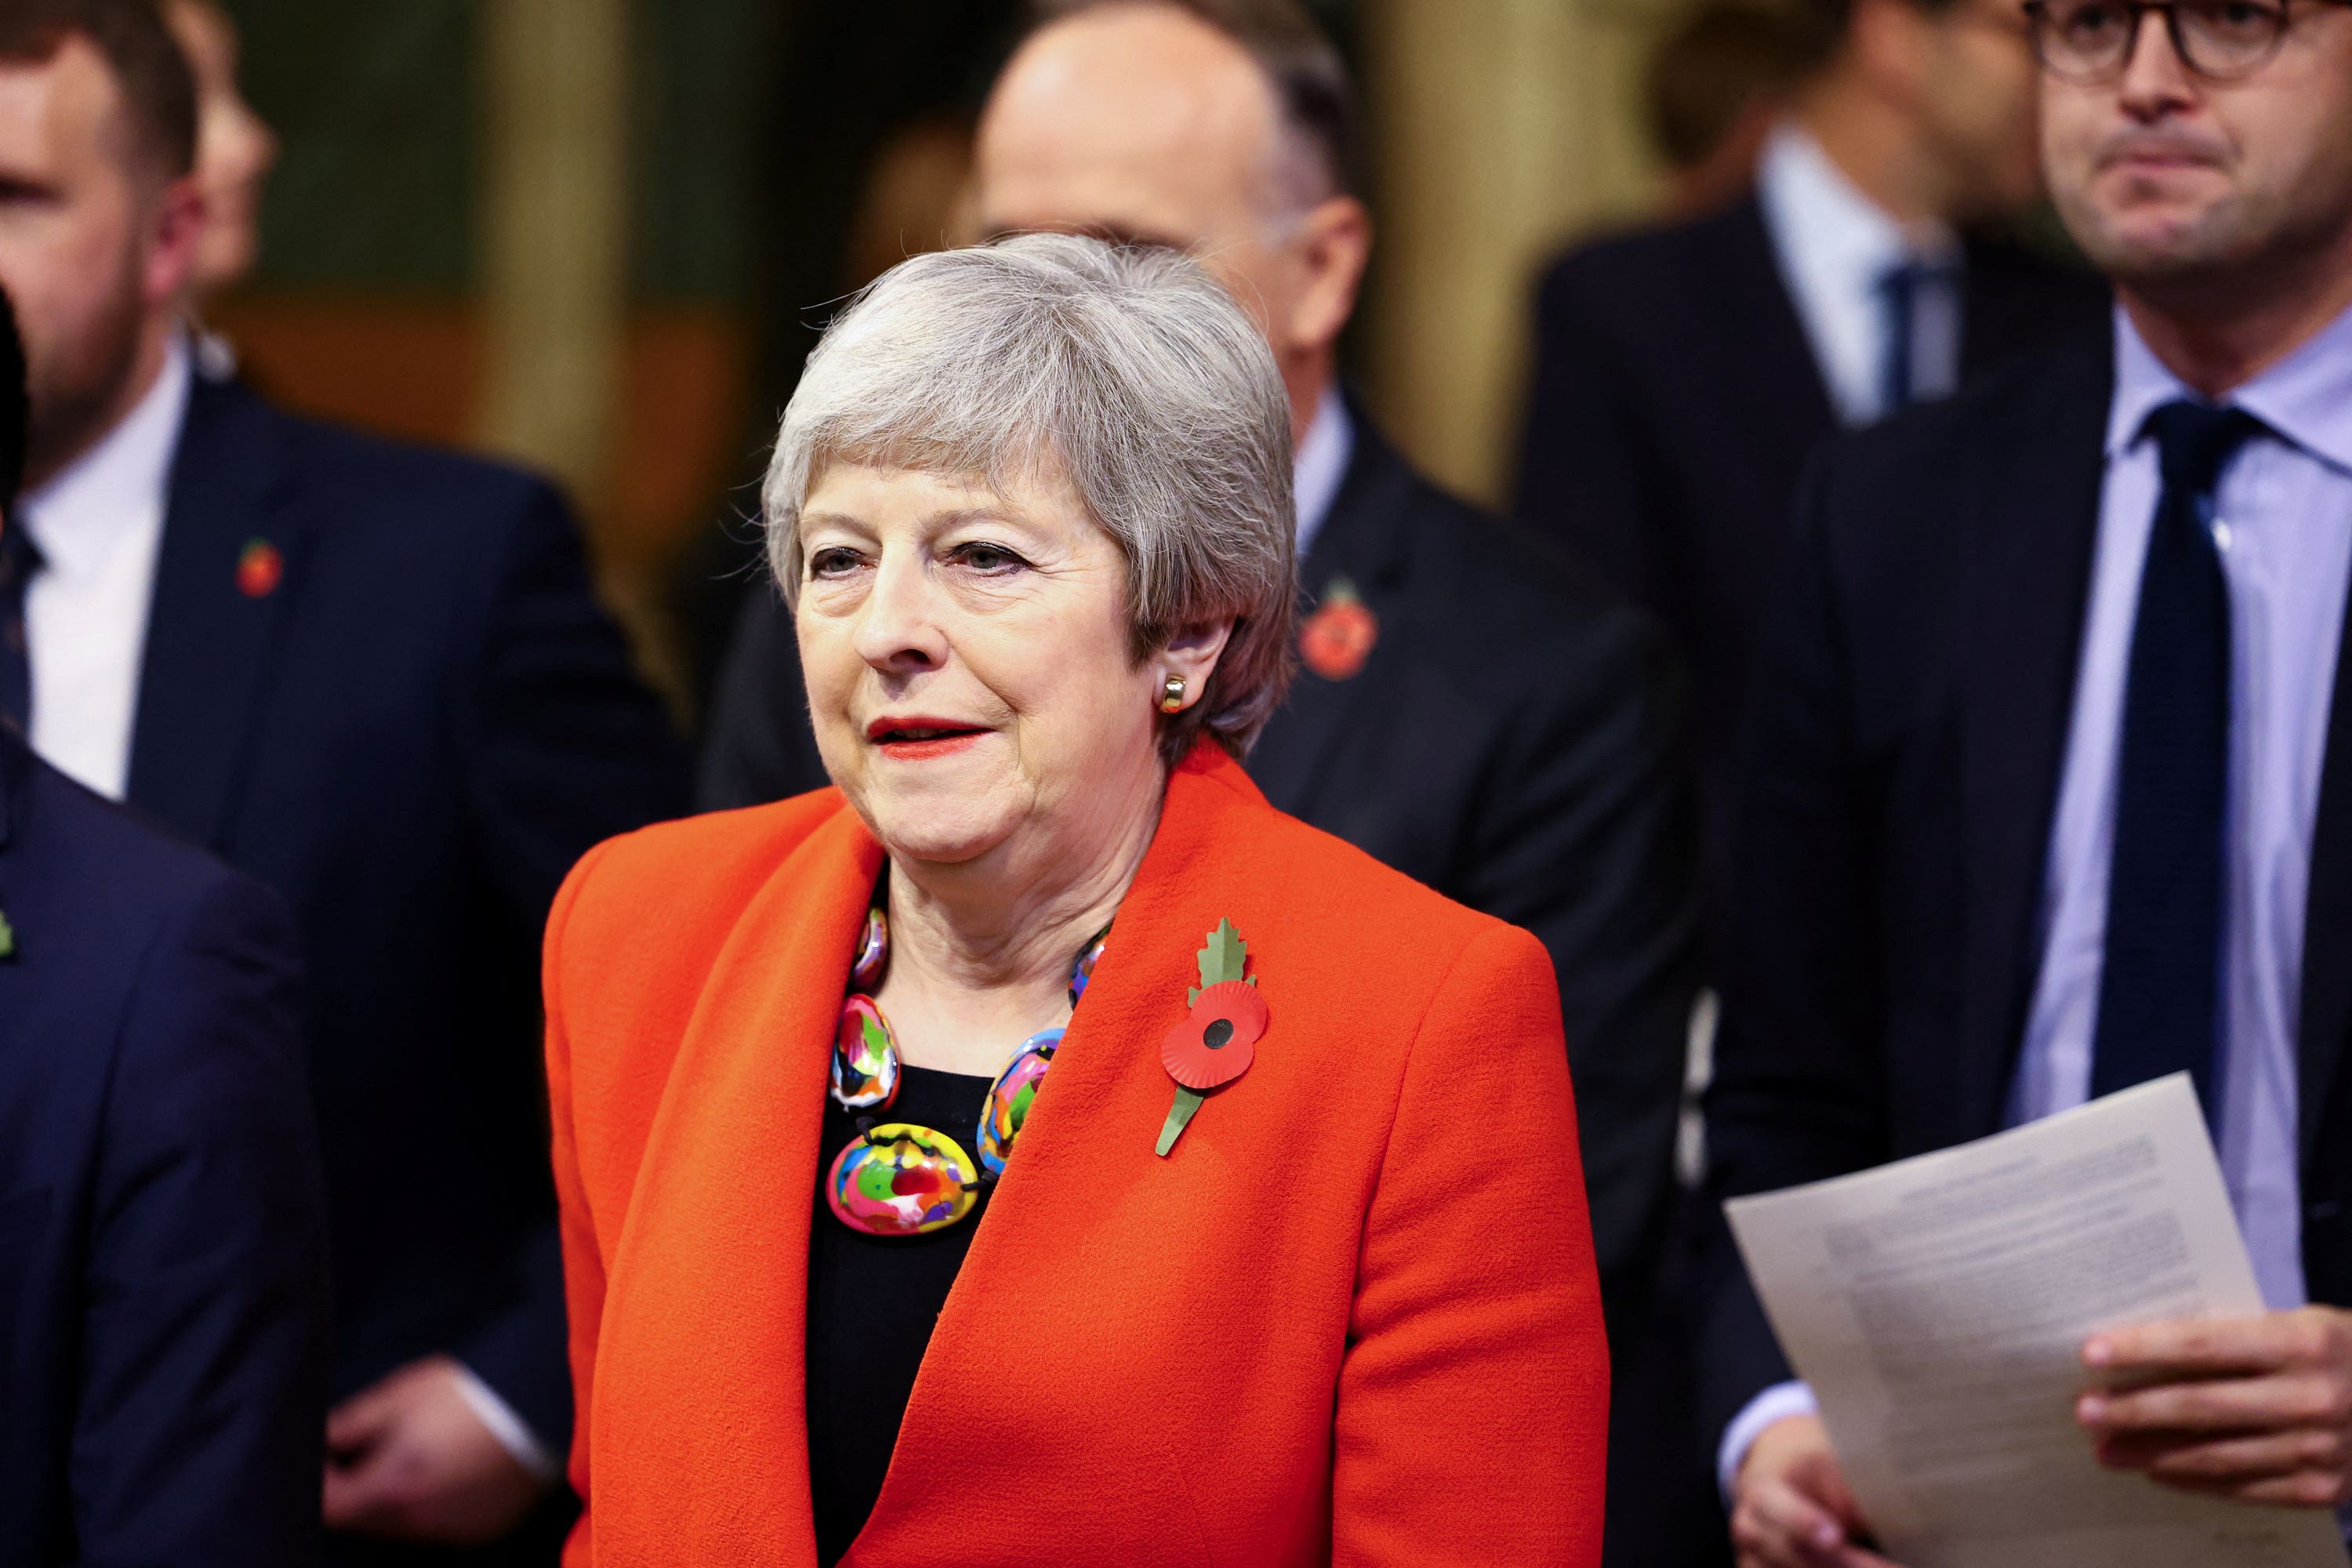 Theresa May’s government is said to have pushed ahead with the honour despite concerns